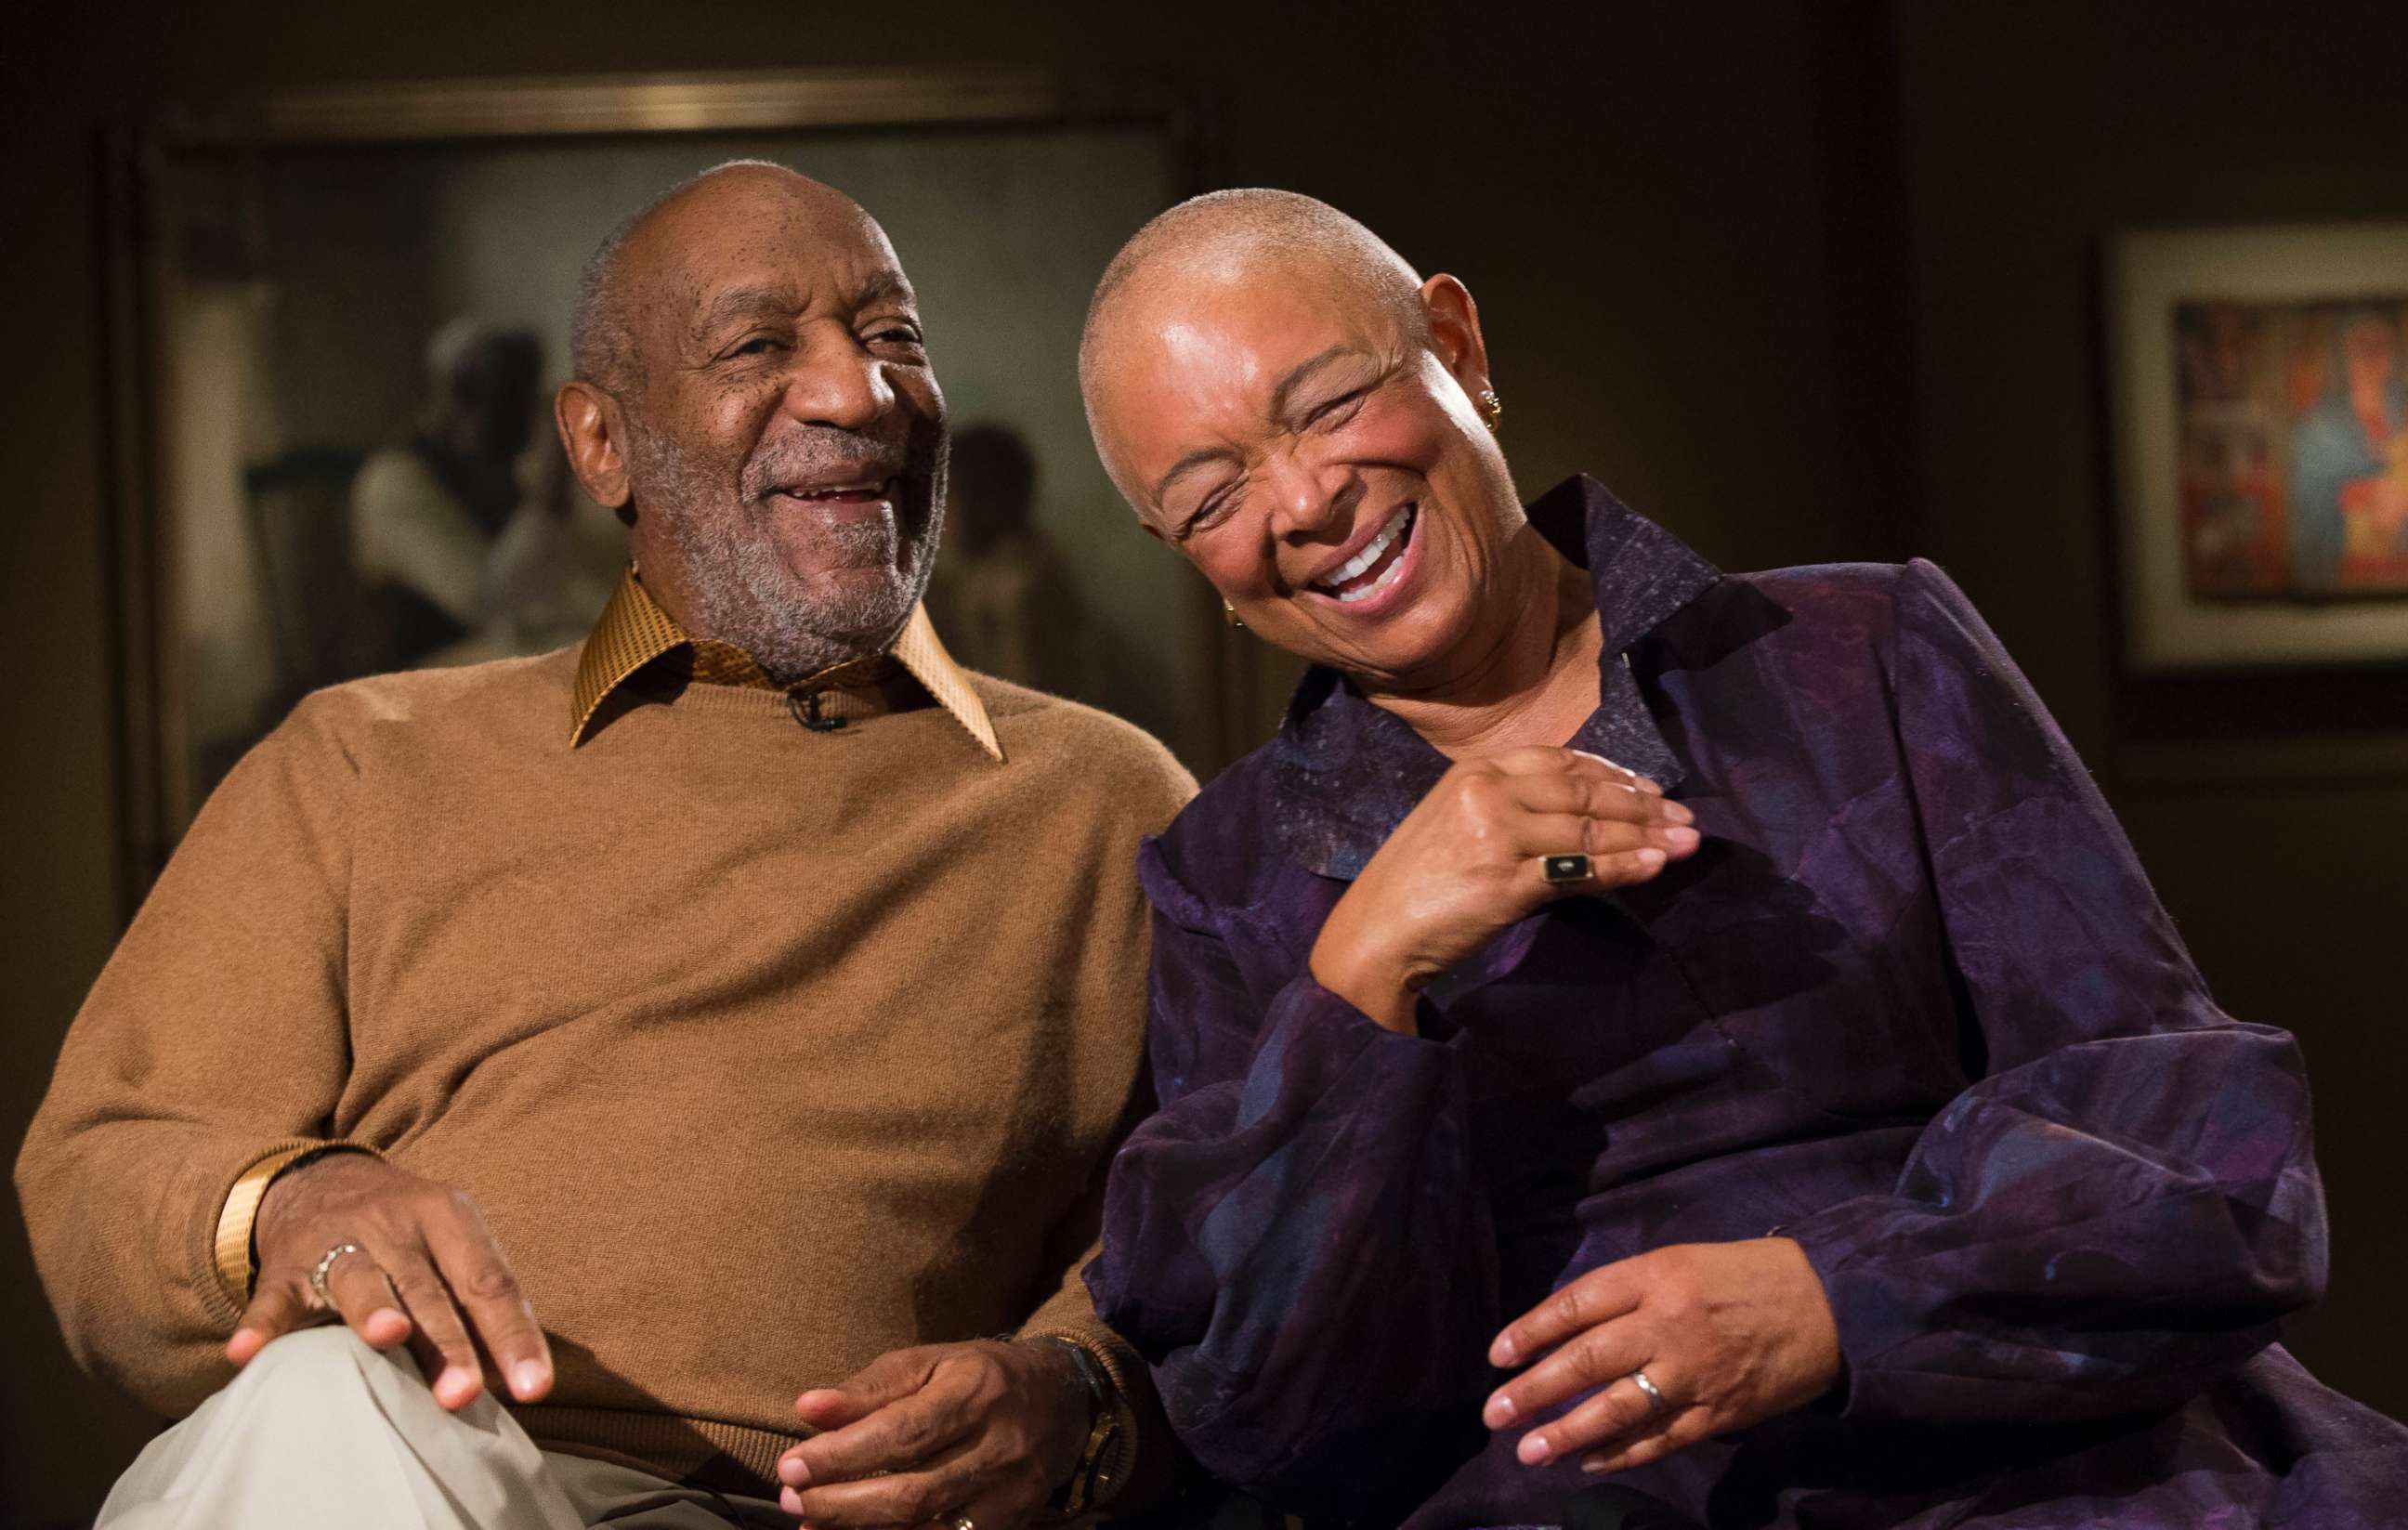 PHOTO: In this Nov. 6, 2014 file photo, entertainer Bill Cosby and his wife Camille laugh as they tell a story about collecting one of the pieces in the upcoming exhibit, "Conversations: African and African-American Artworks in Dialogue," in Washington. 